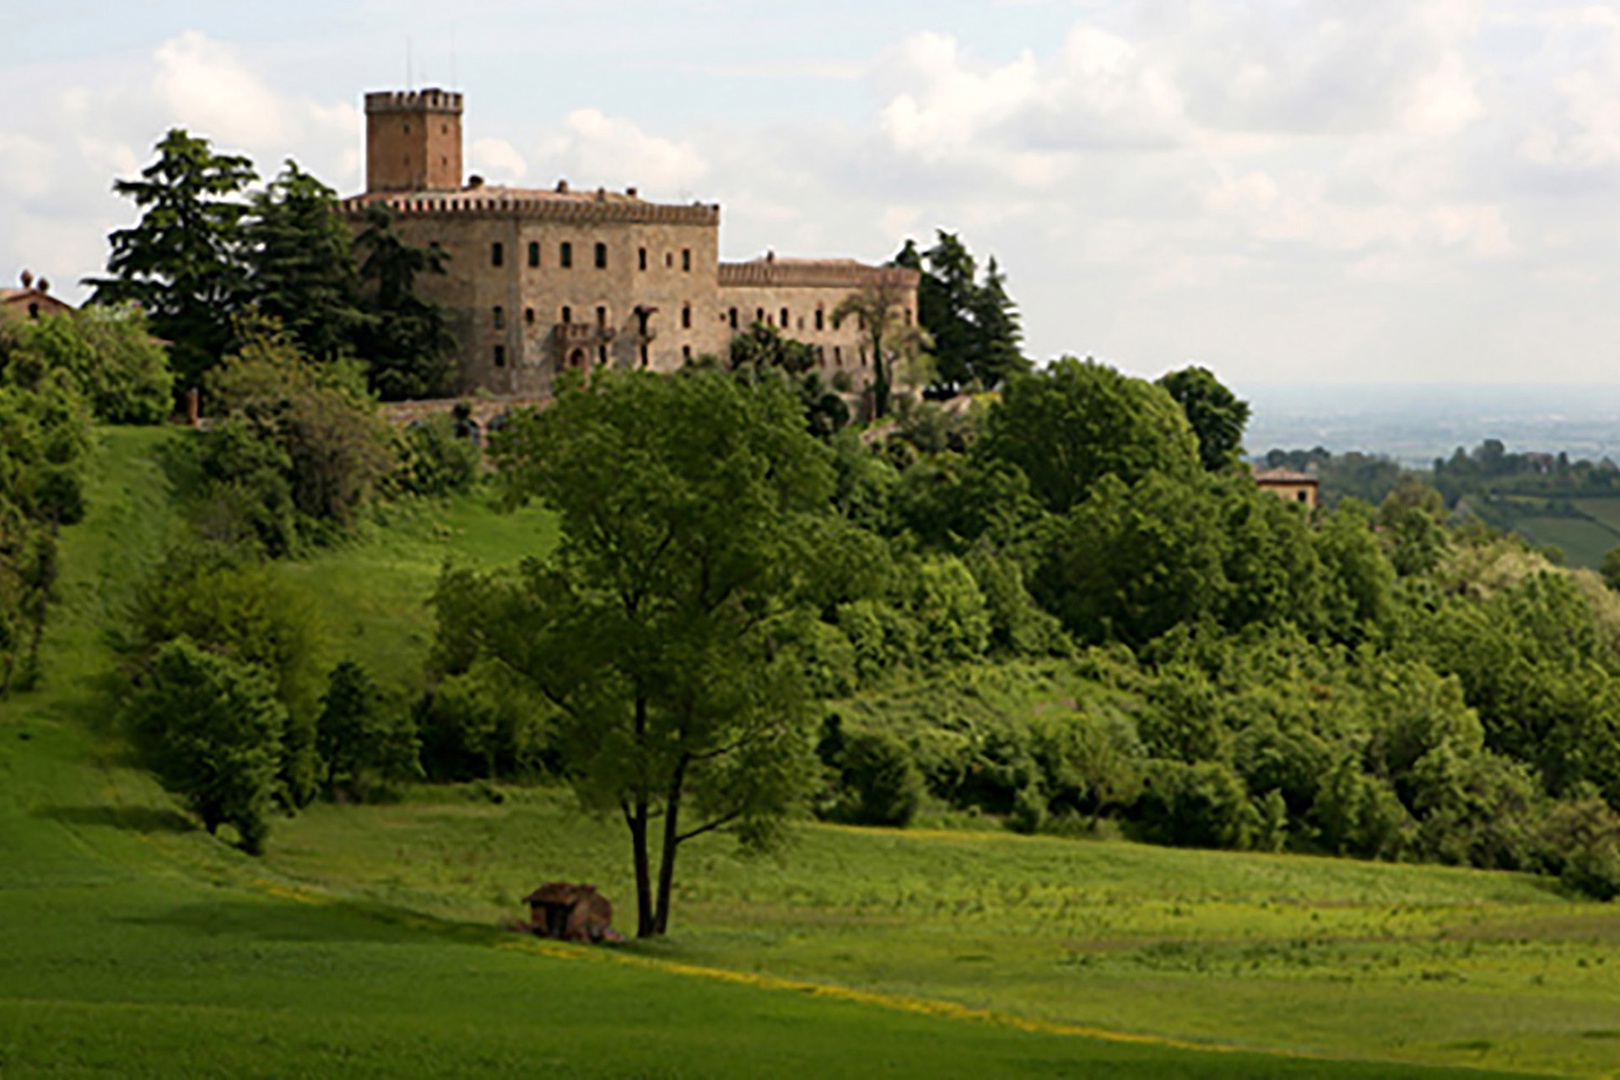 Nearby castle is a great place to visit, dine and enjoy the spa.